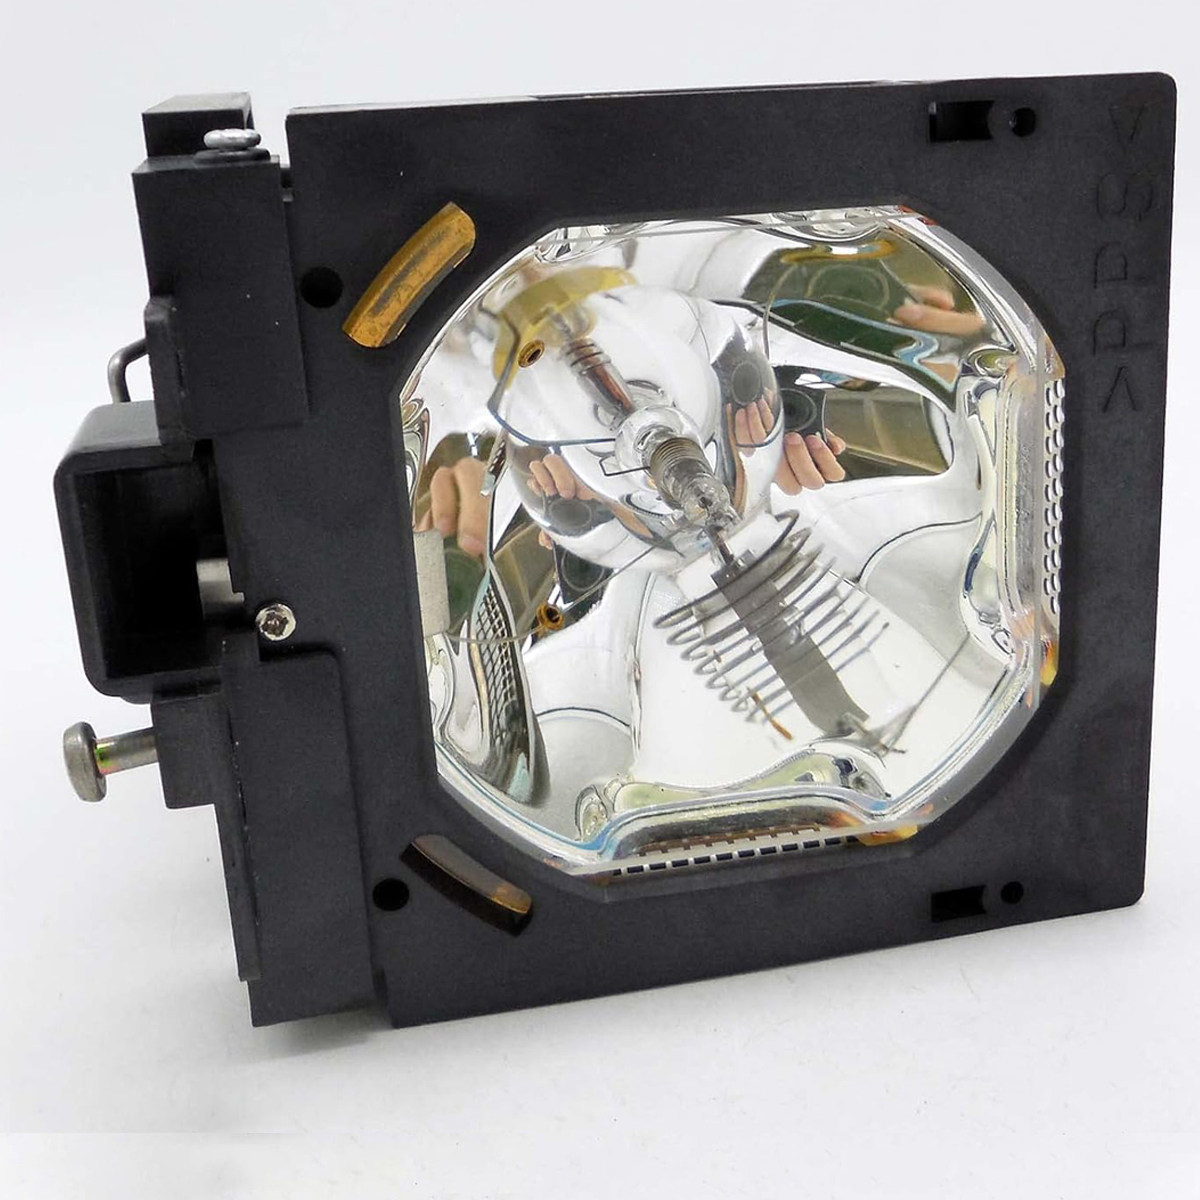 Replacement Projector lamp POA-LMP52 For Sanyo PLC-XF35 PLC-XF35L